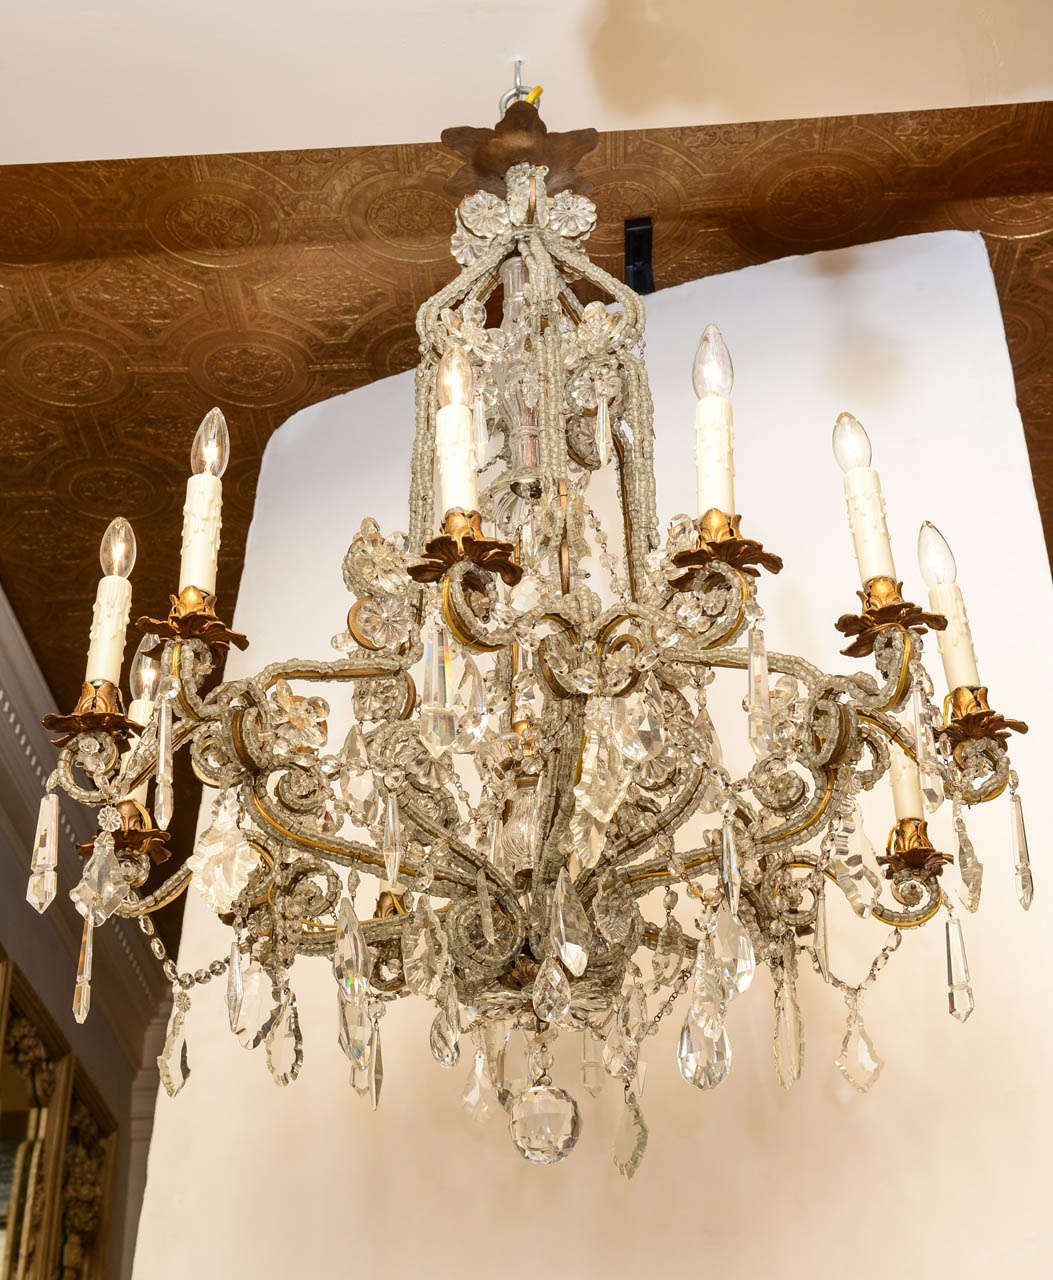 Chandelier, having a frame of gilt iron, entirely covered in macaroni crystal beads; its knopped, glass-sheathed center column surmounted by crown pediment finished with flower-form drops, its six scrolling candlearms split into doubles, holding